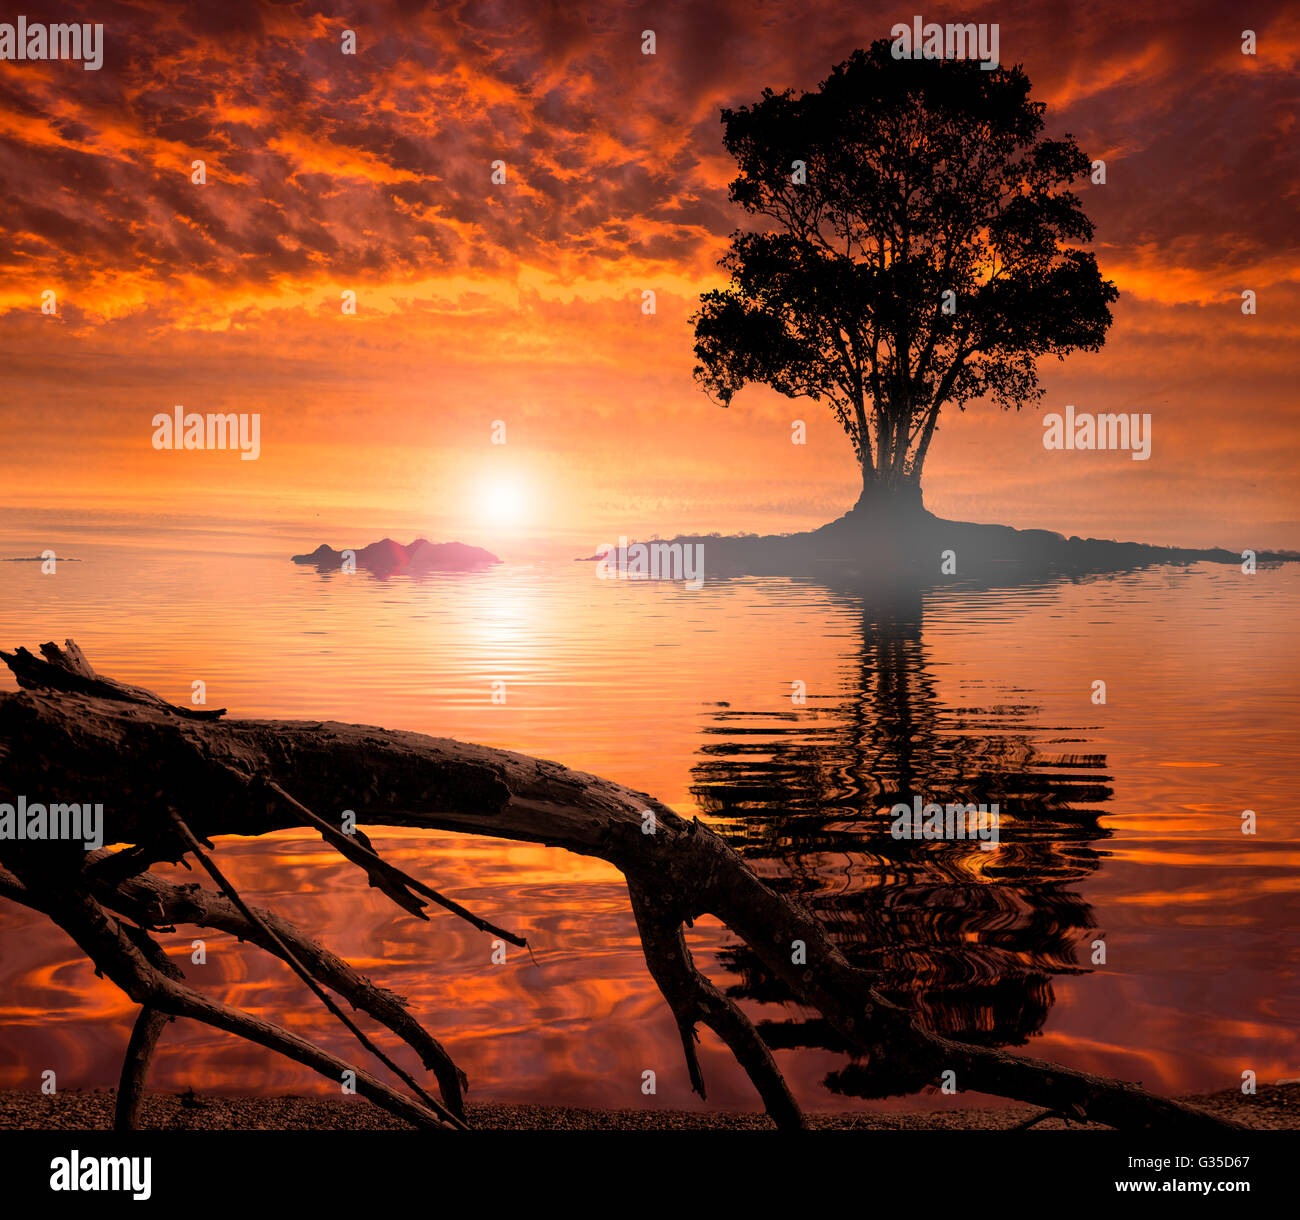 A lone tree on a small island at sunset with great reflections in the becalmed waters with driftwood in the foreground Stock Photo